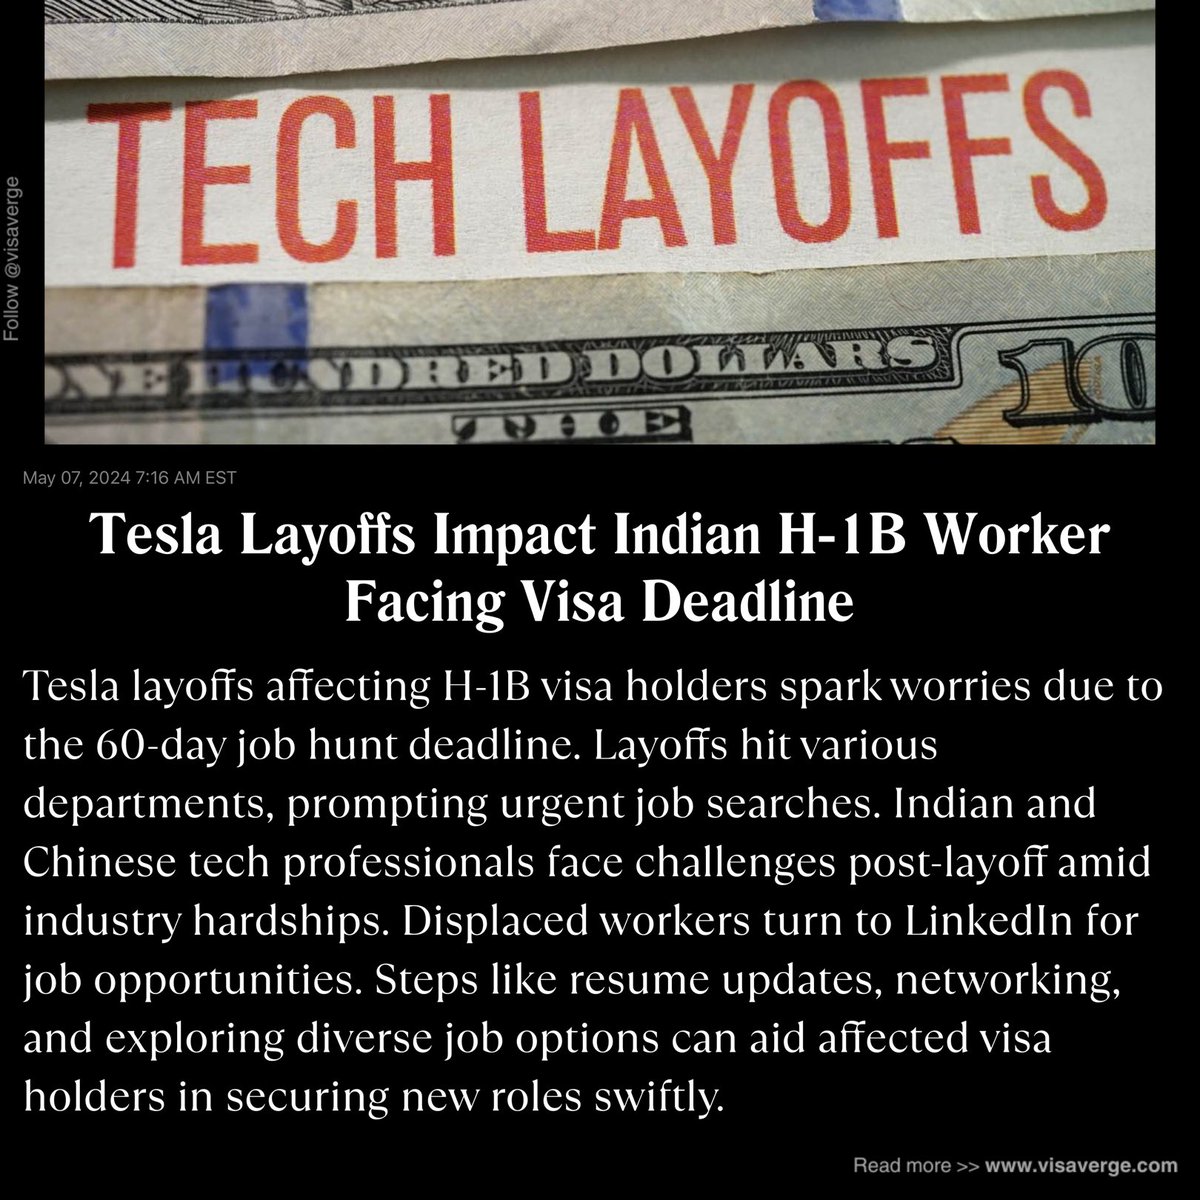 🚨 Indian engineer from Mumbai laid off by Tesla faces H-1B visa deadline 😢 Struggling to find new job within 60-day limit 📆 Let's support those impacted by layoffs! #H1BVisa #TeslaLayoffs #VisaVerge @visaverge 🌐